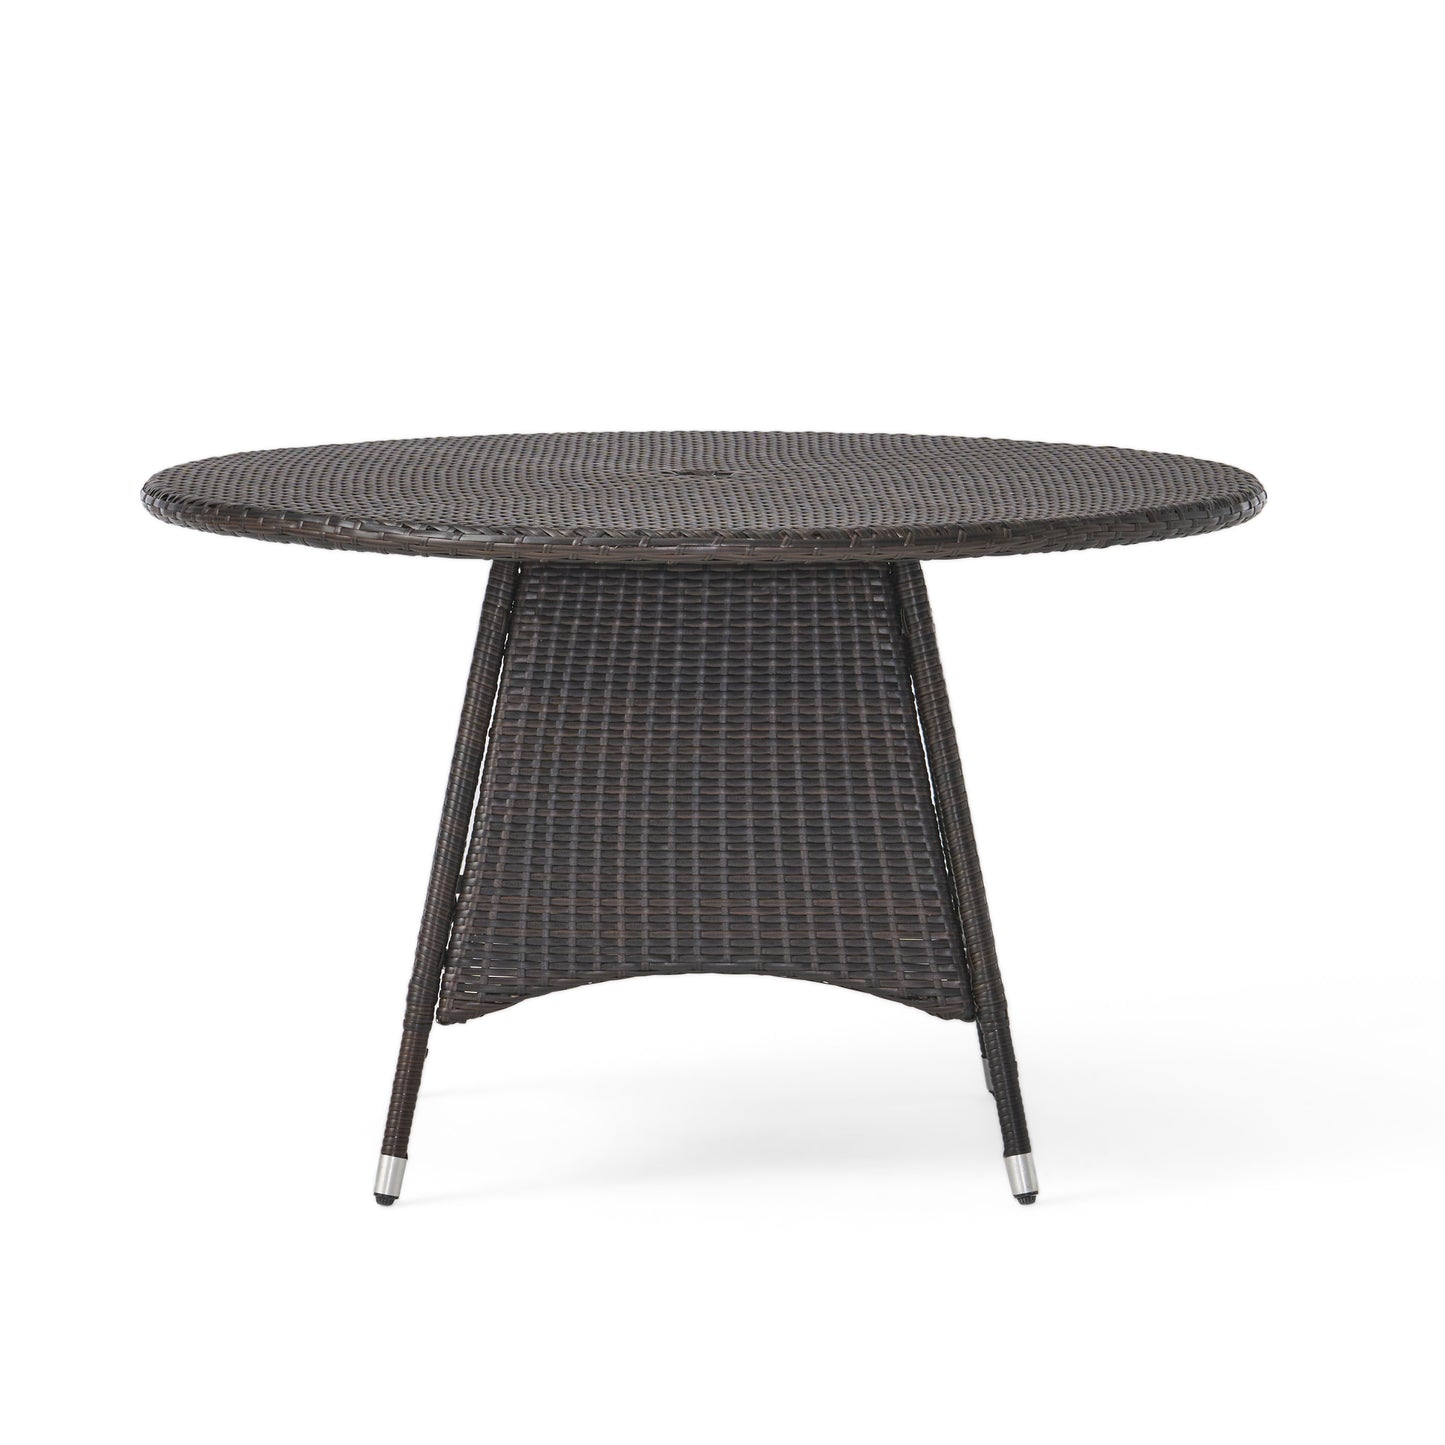 Kanza Outdoor Brown Wicker Round Dining Table